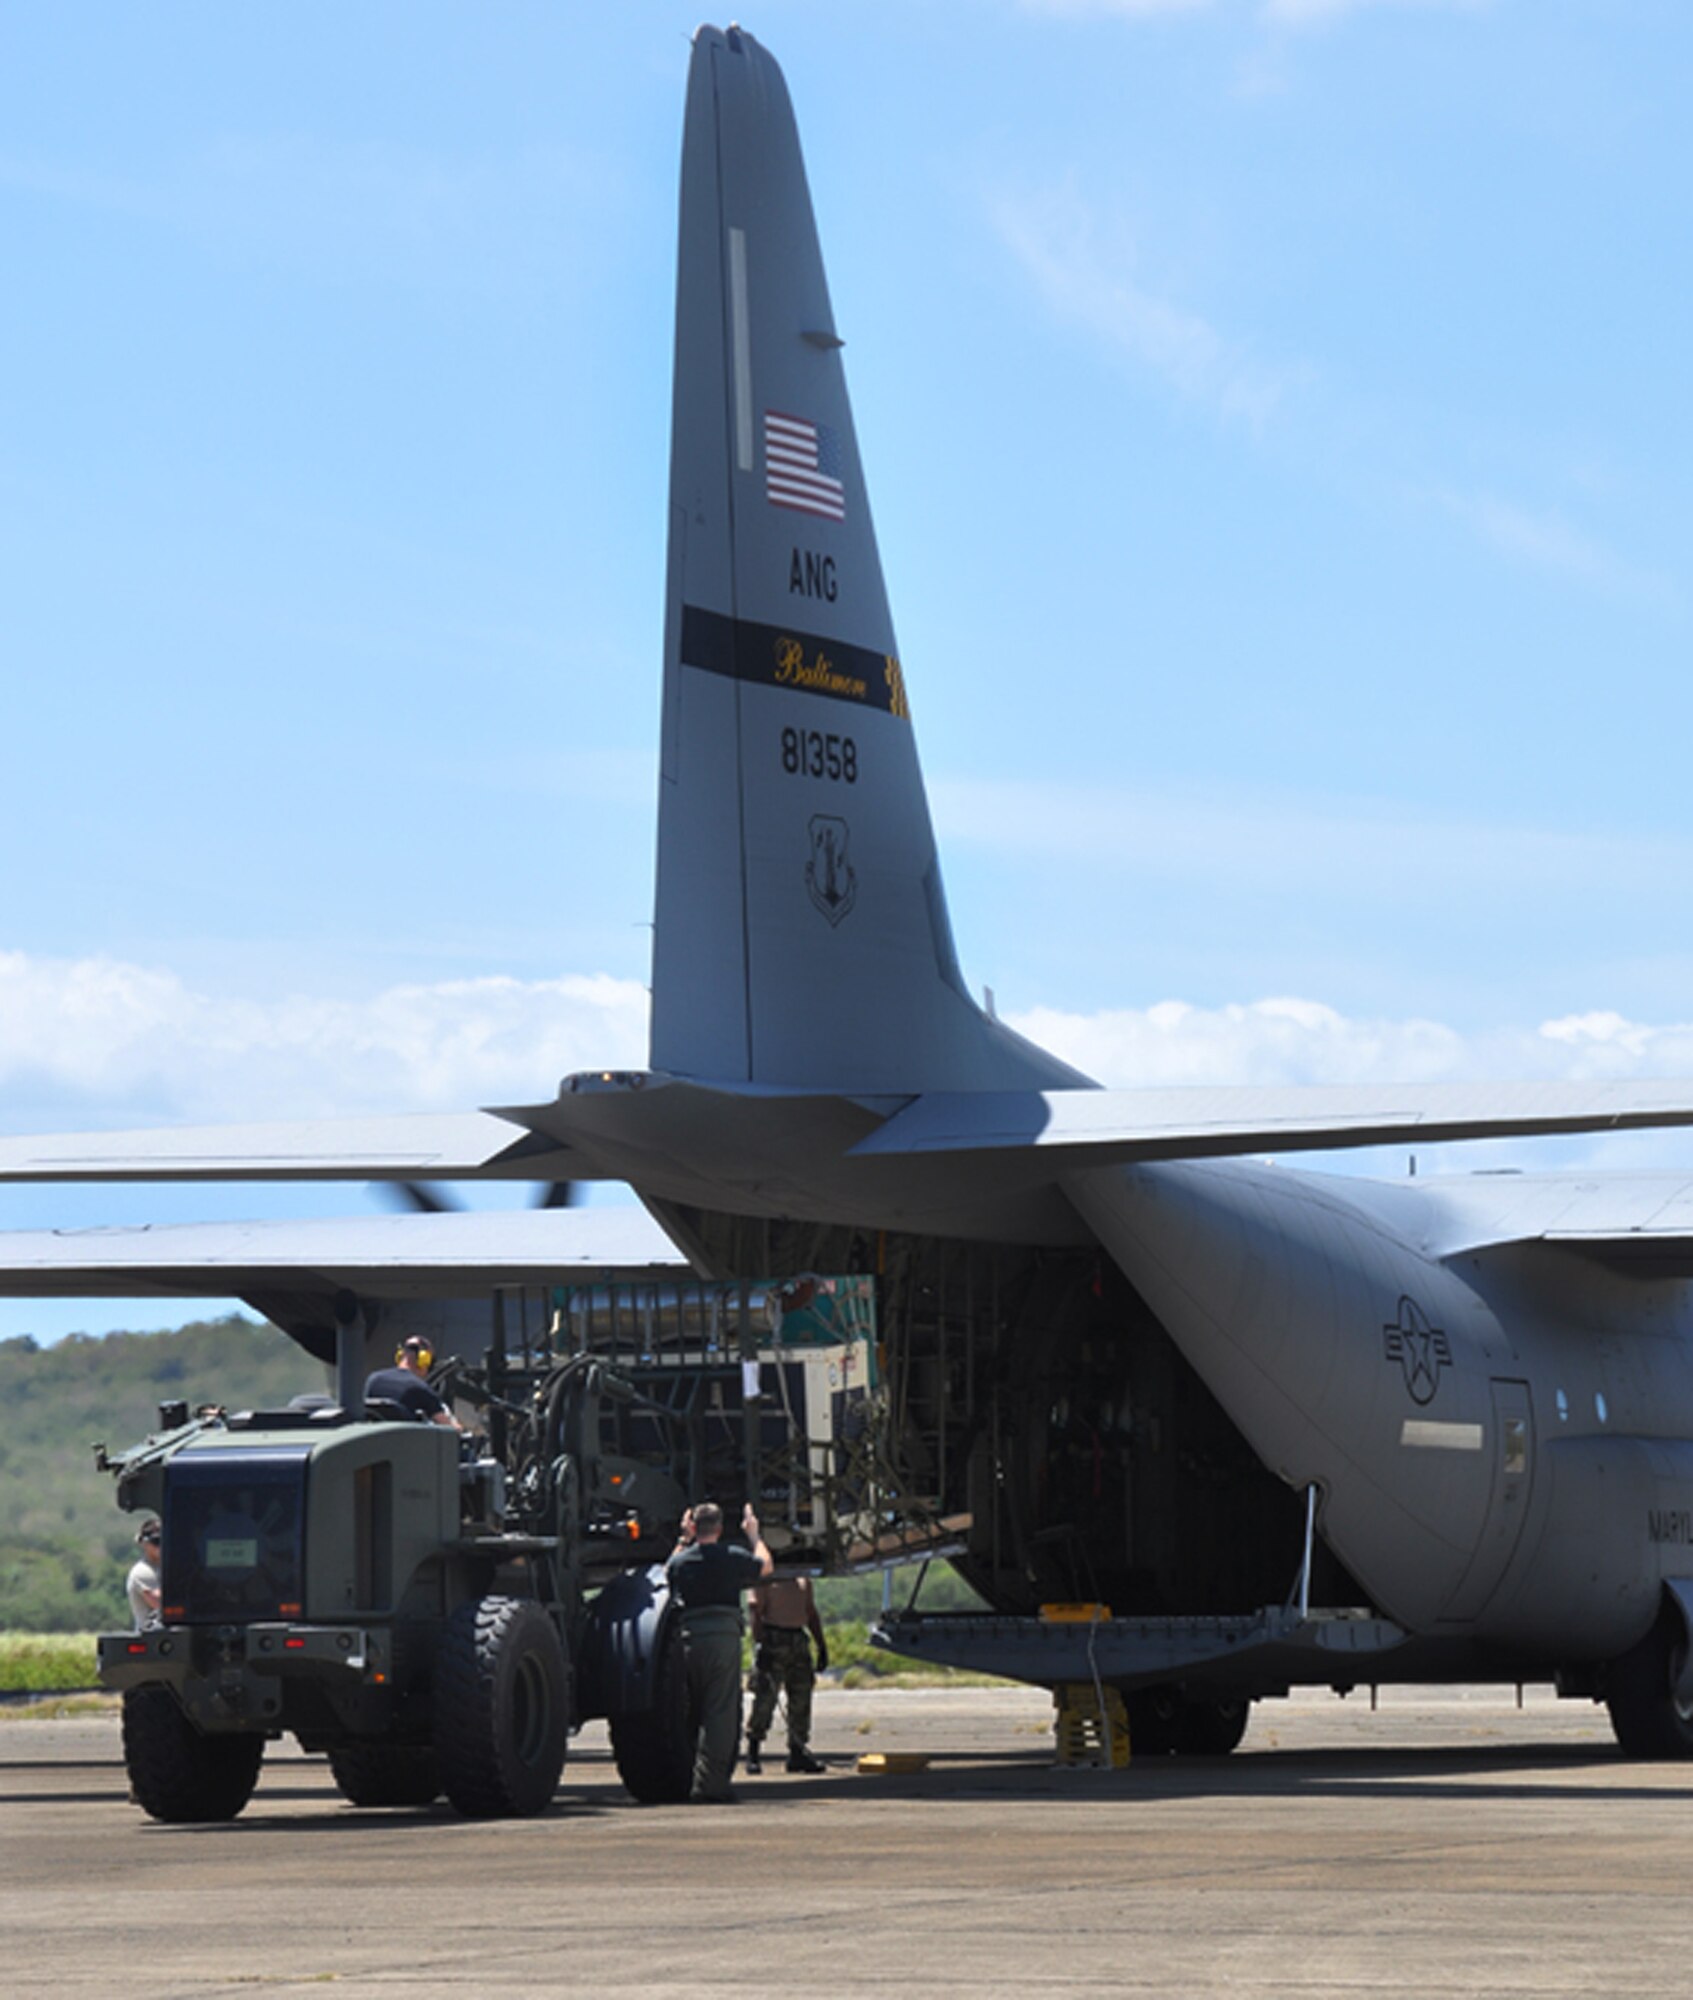 Airmen from the 817th Contingency Response Group guide a pallet onto a C-130 Hercules from the Maryland Air National Guard during the Vigilant Guard exercise held in Puerto Rico March 23 to 29. The exercise focused on a coordinated response by local and federal agencies following a natural disaster in Puerto Rico.  The 817th CRG is part of the 621st Contingency Response Wing at McGuire Air Force Base, N.J.  (U.S. Air Force photo/1st Lt. Dustin Doyle)